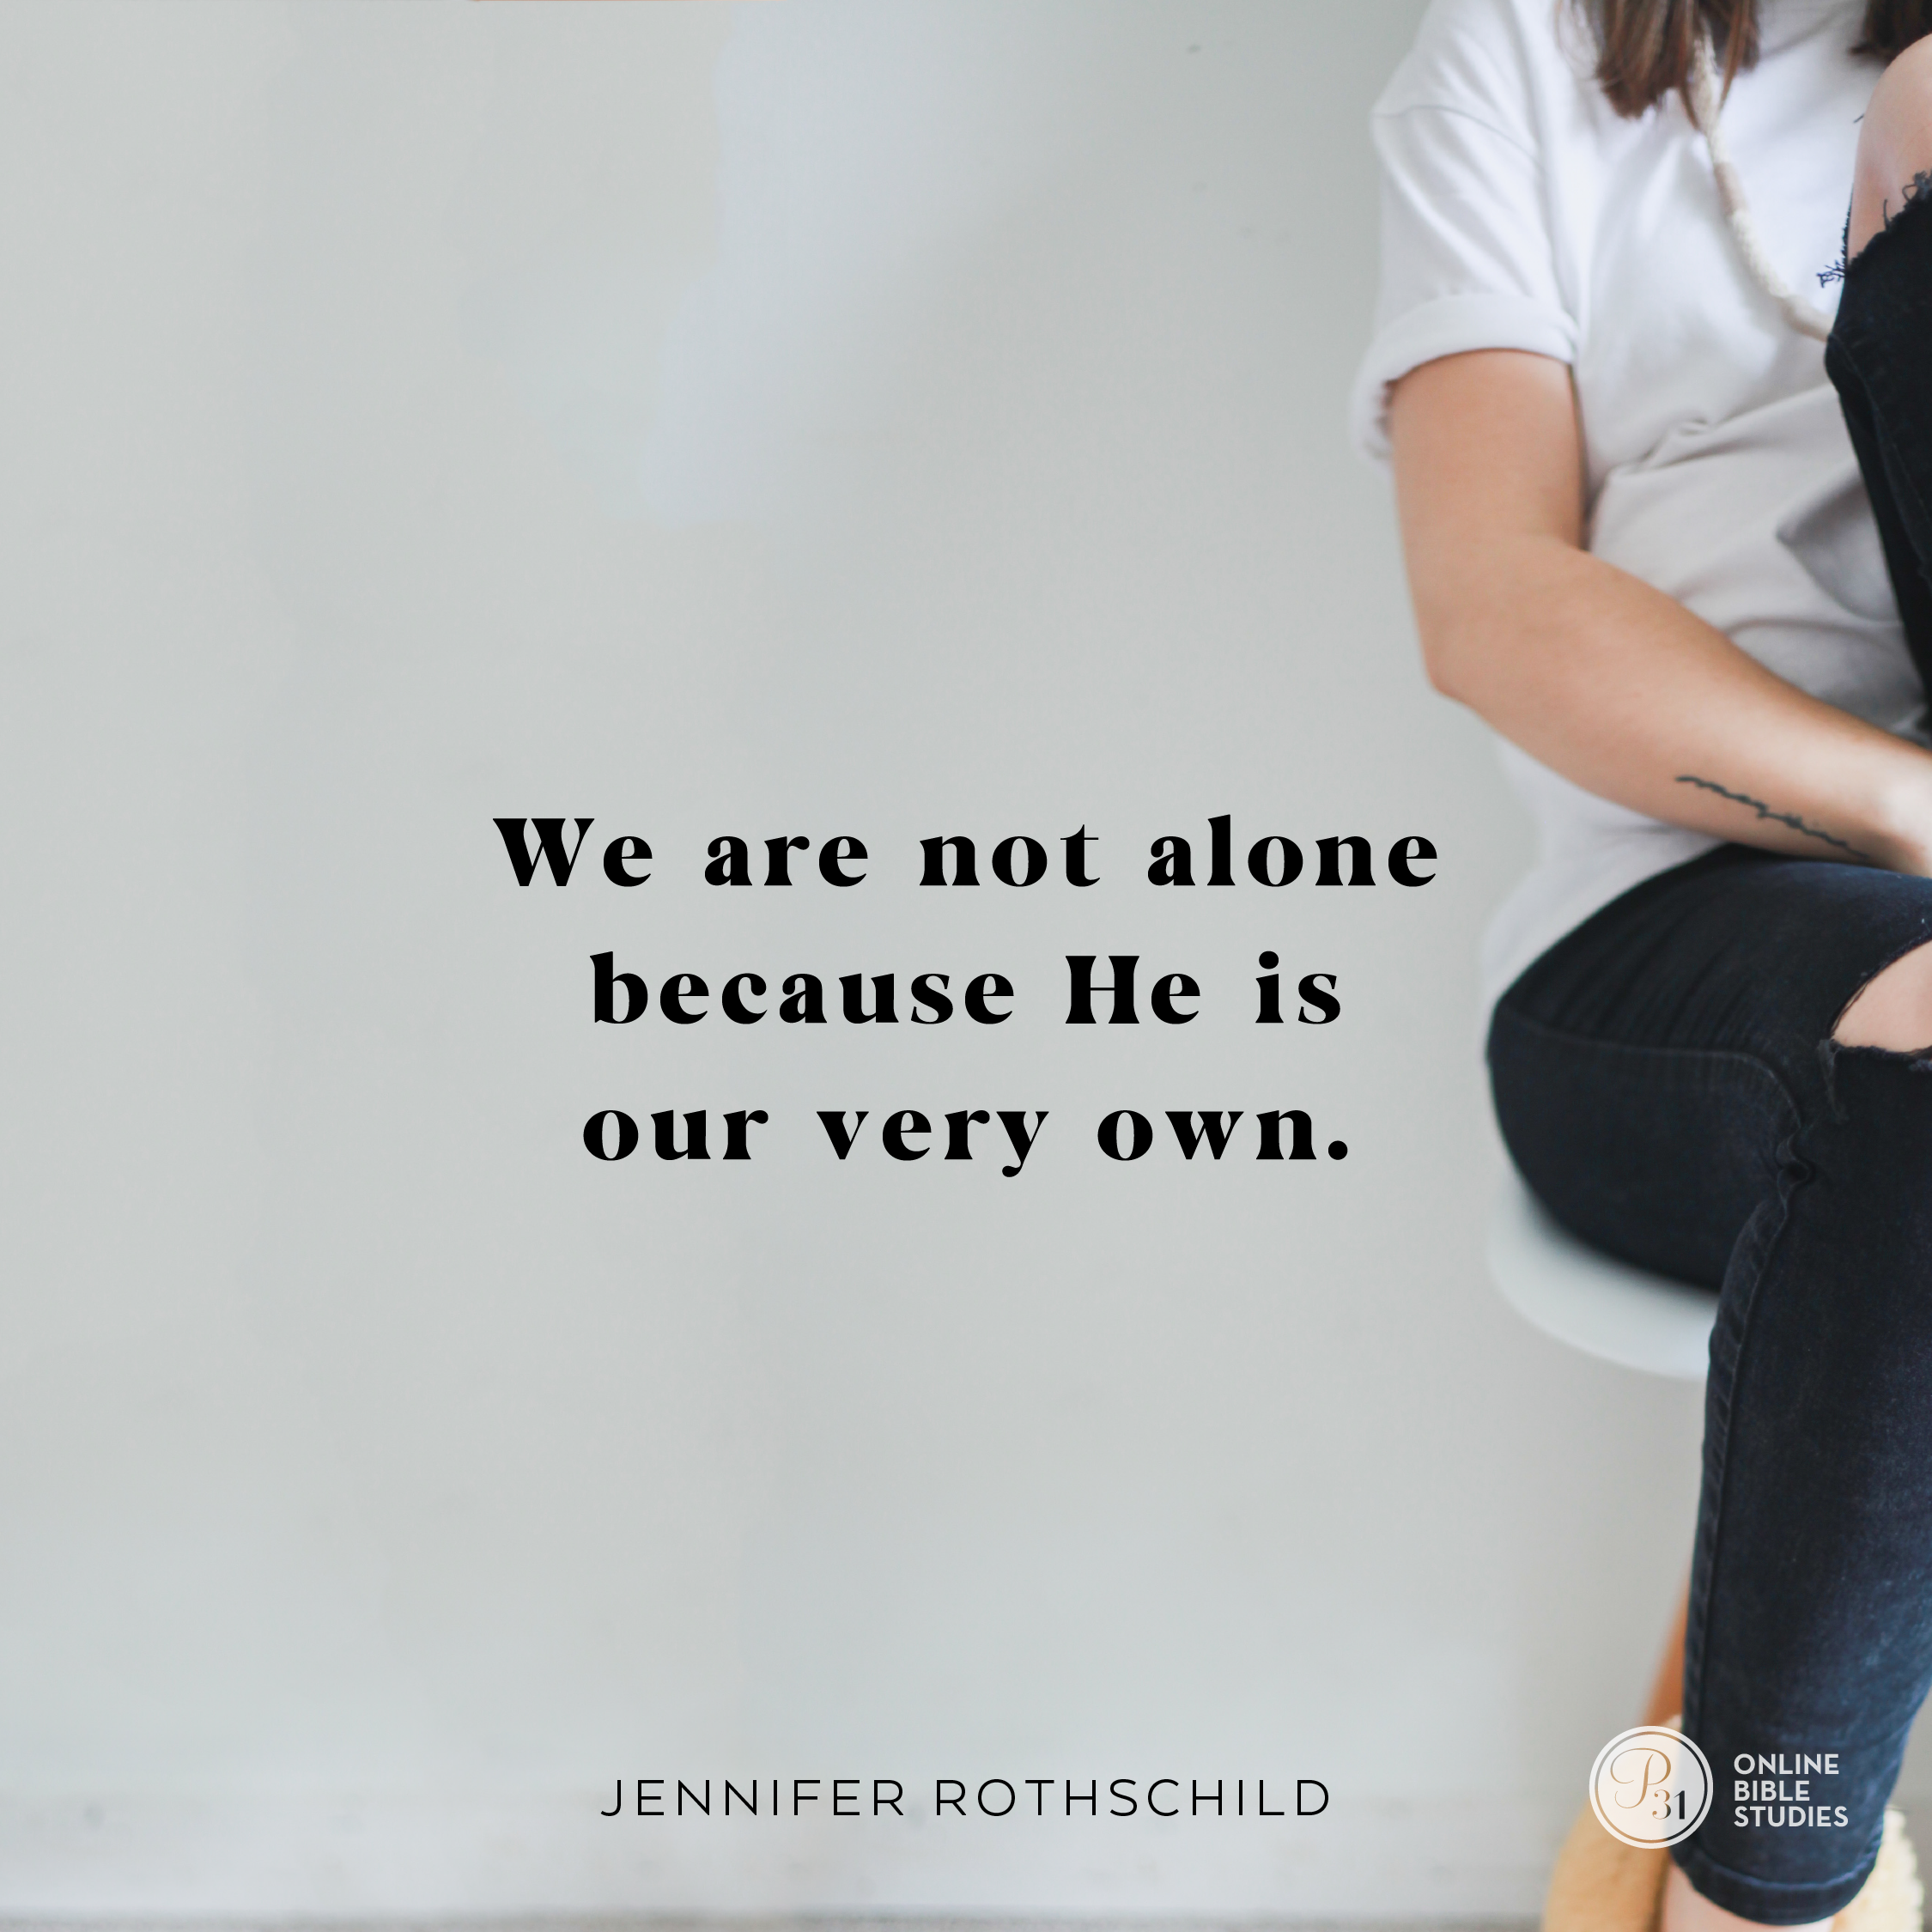 “We are not alone because He is our very own.”  - Jennifer Rothschild #Psalm23Study | Proverbs 31 Online Bible Studies Week 1 #P31OBS